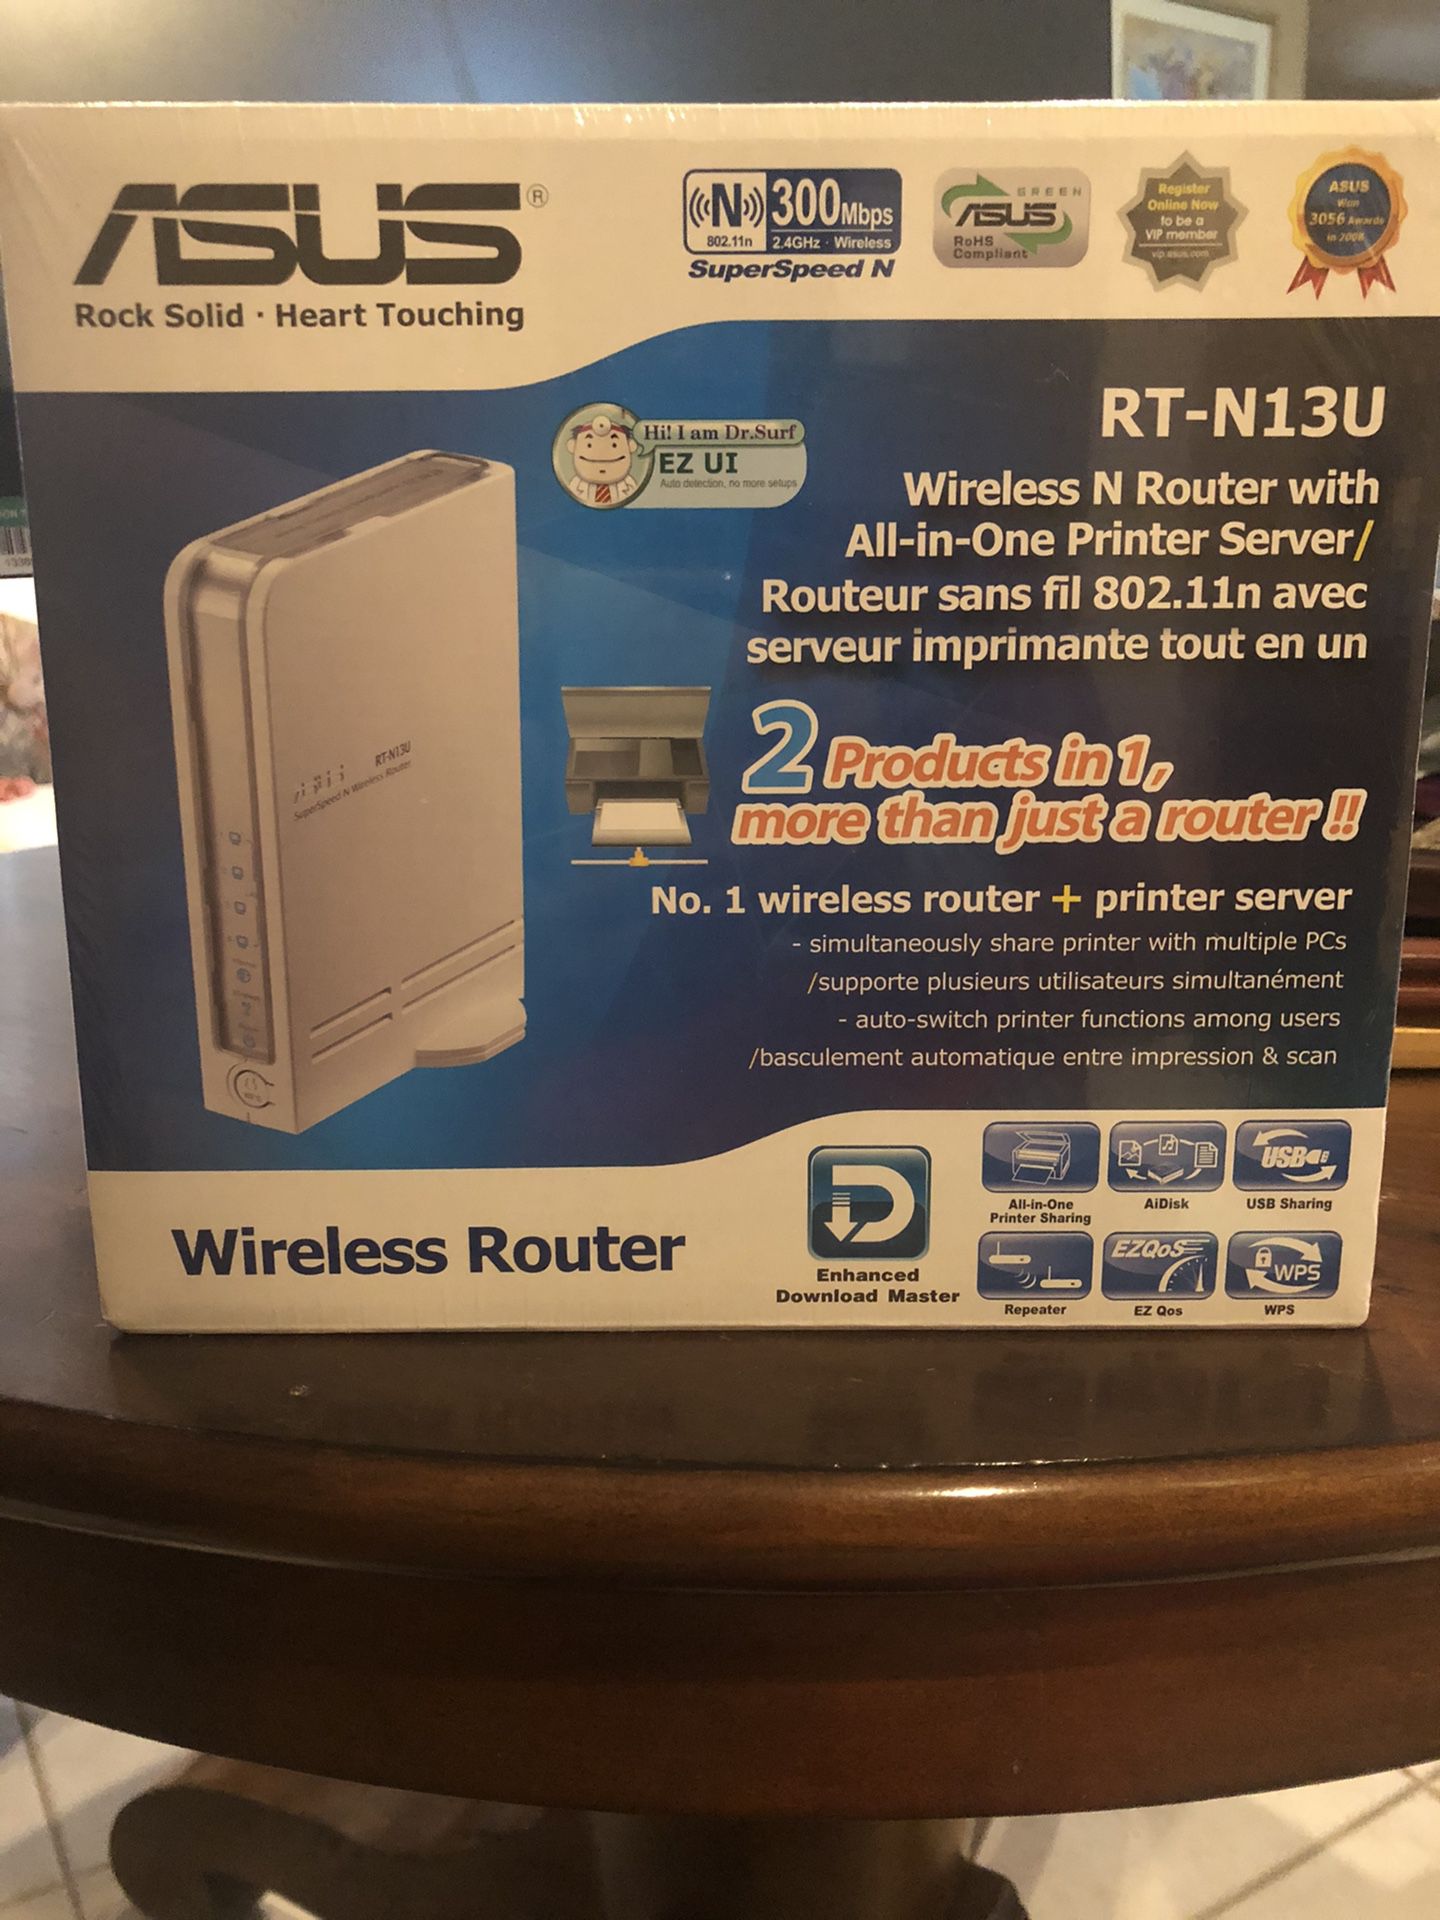 ASUS Wireless N Router w/ All-in-one Printer Server - Brand New!